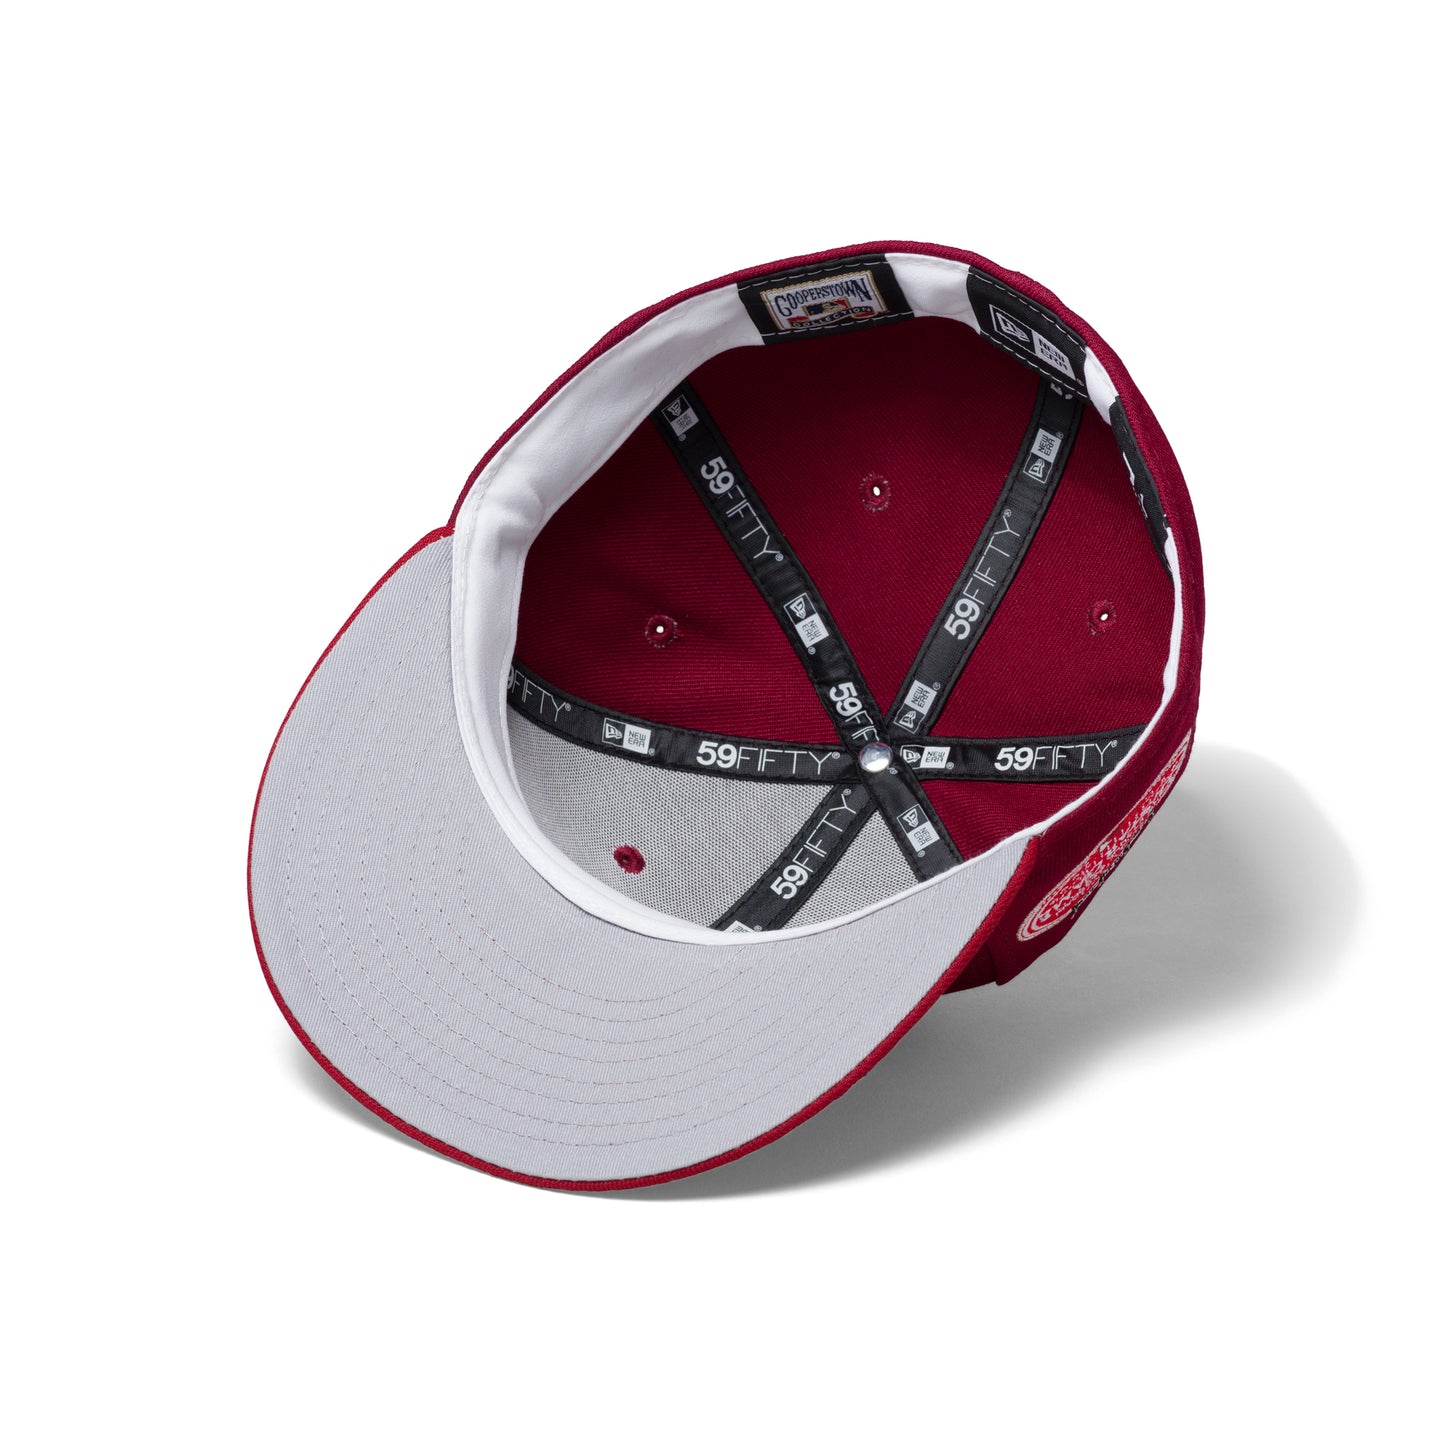 Concepts x New Era 5950 New York Yankees 2008 All Star Game (Red)